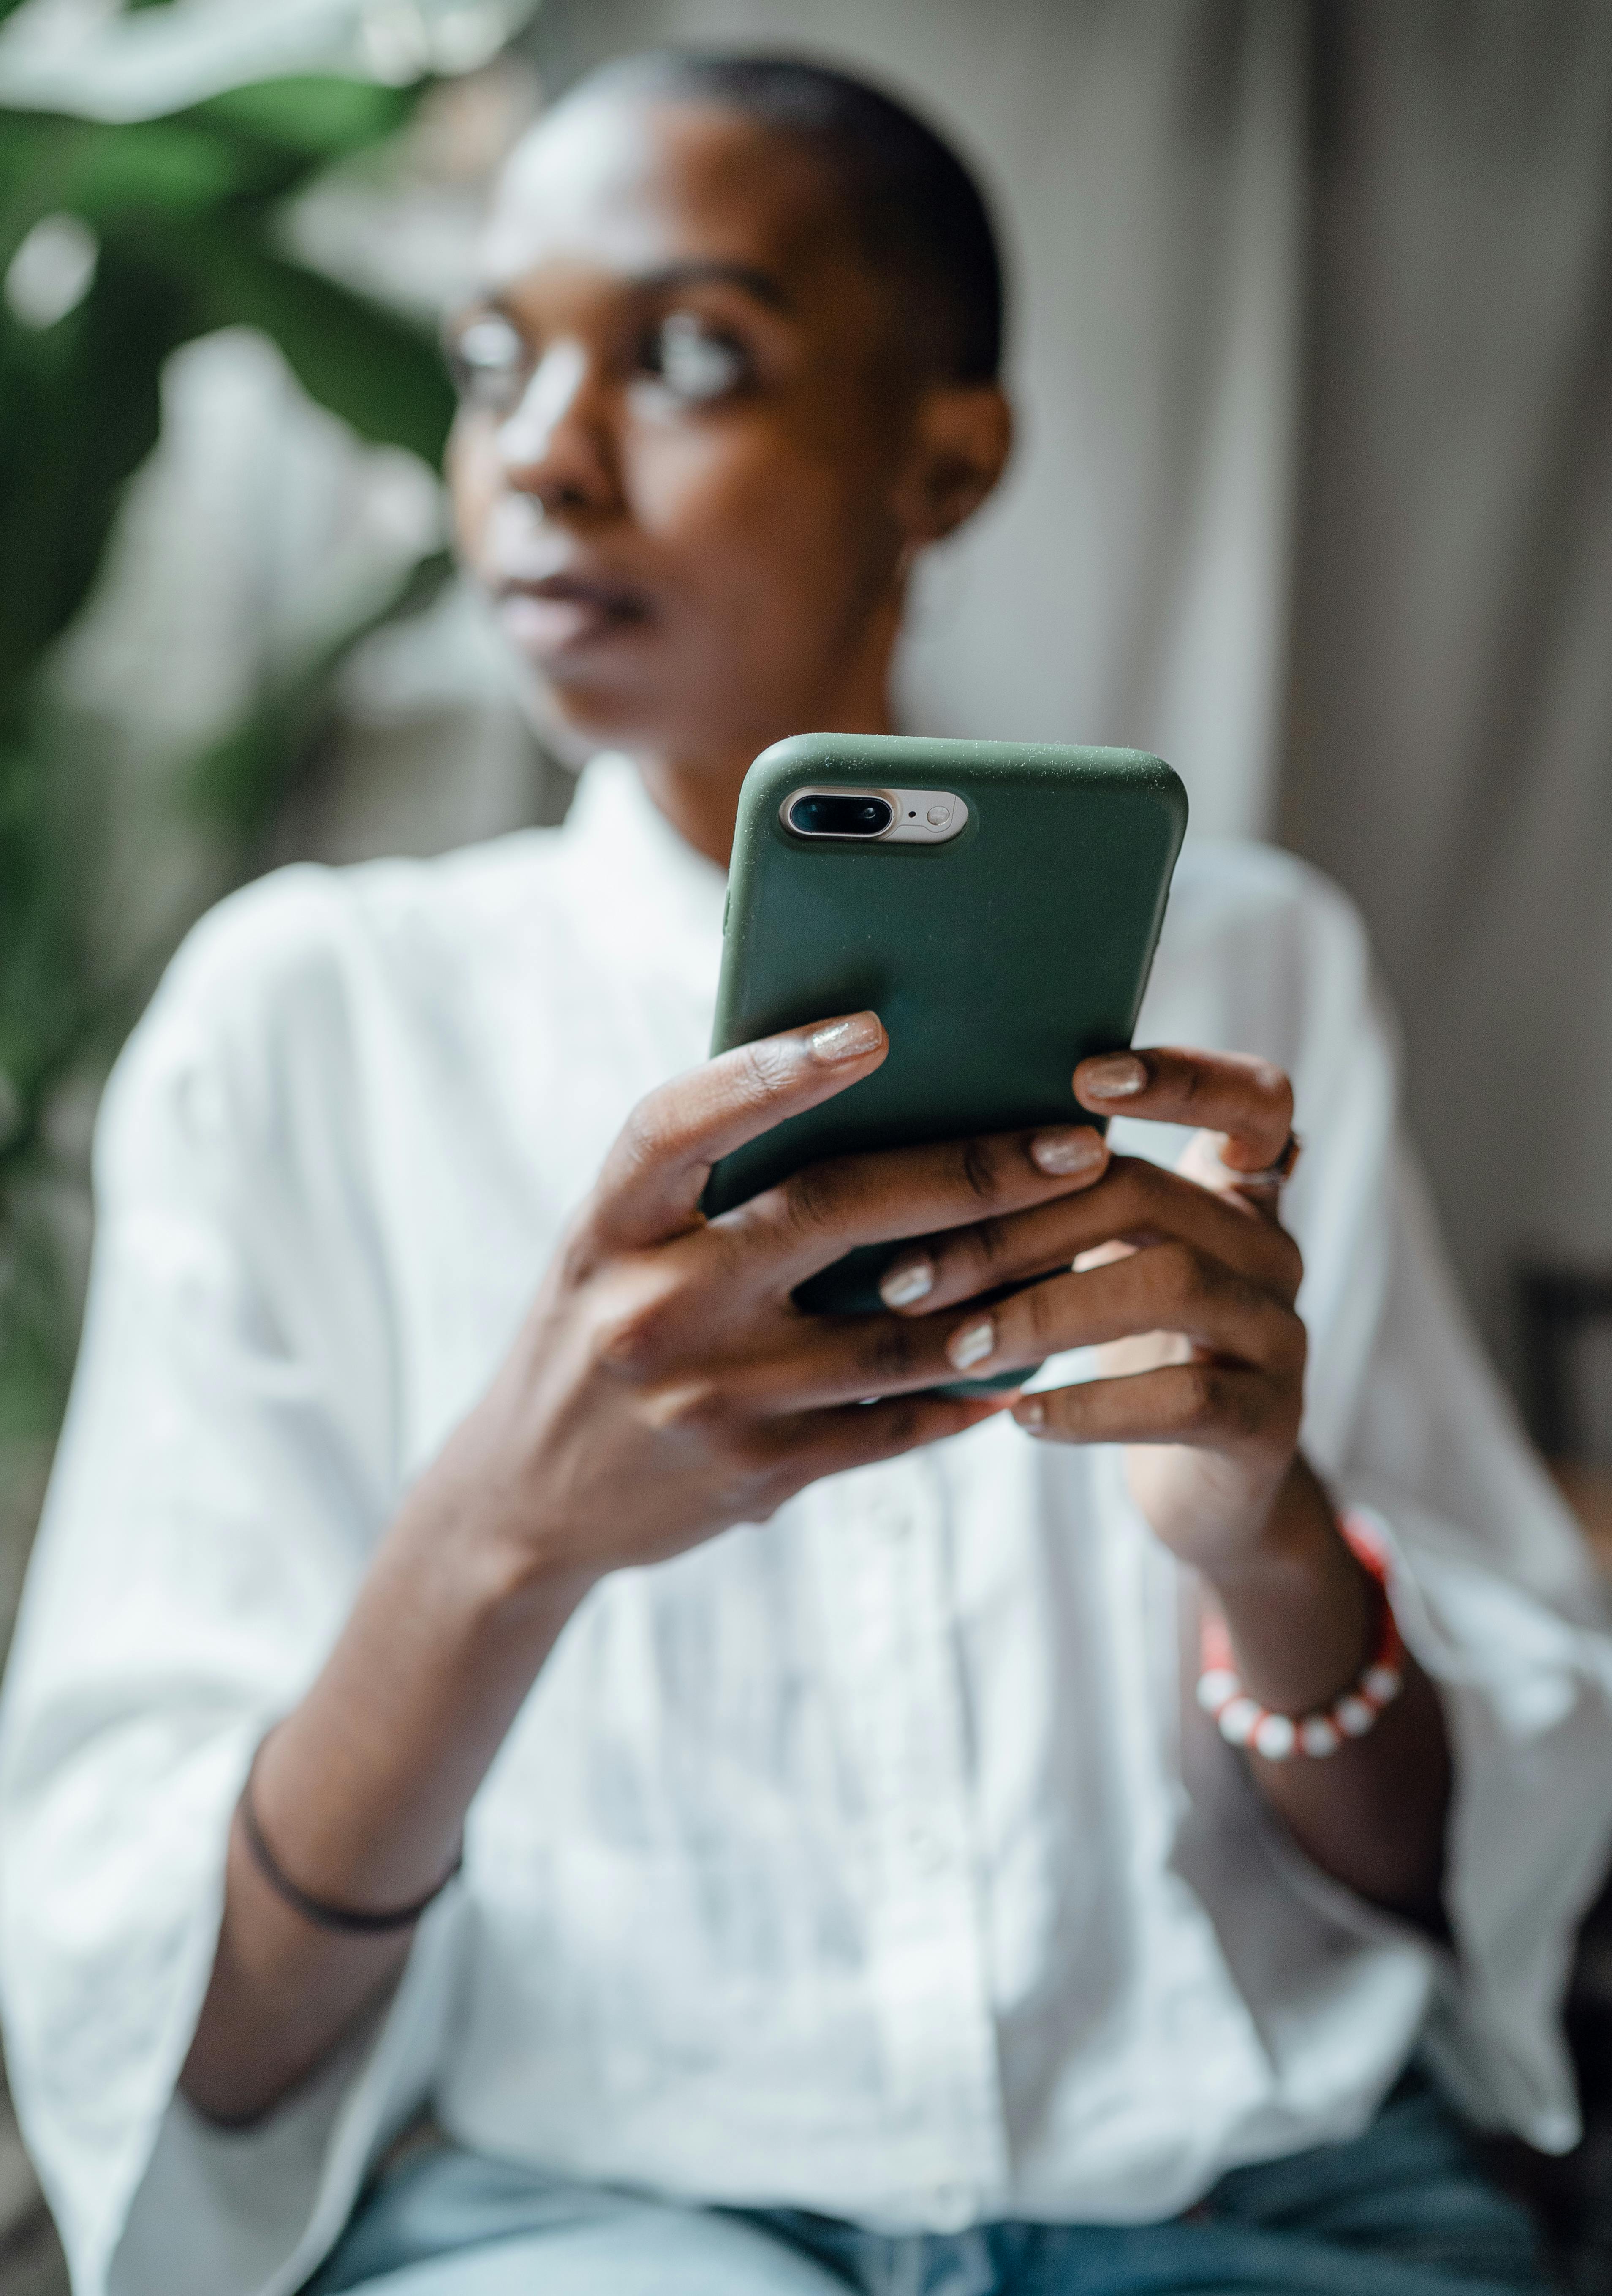 black woman using smartphone and looking away